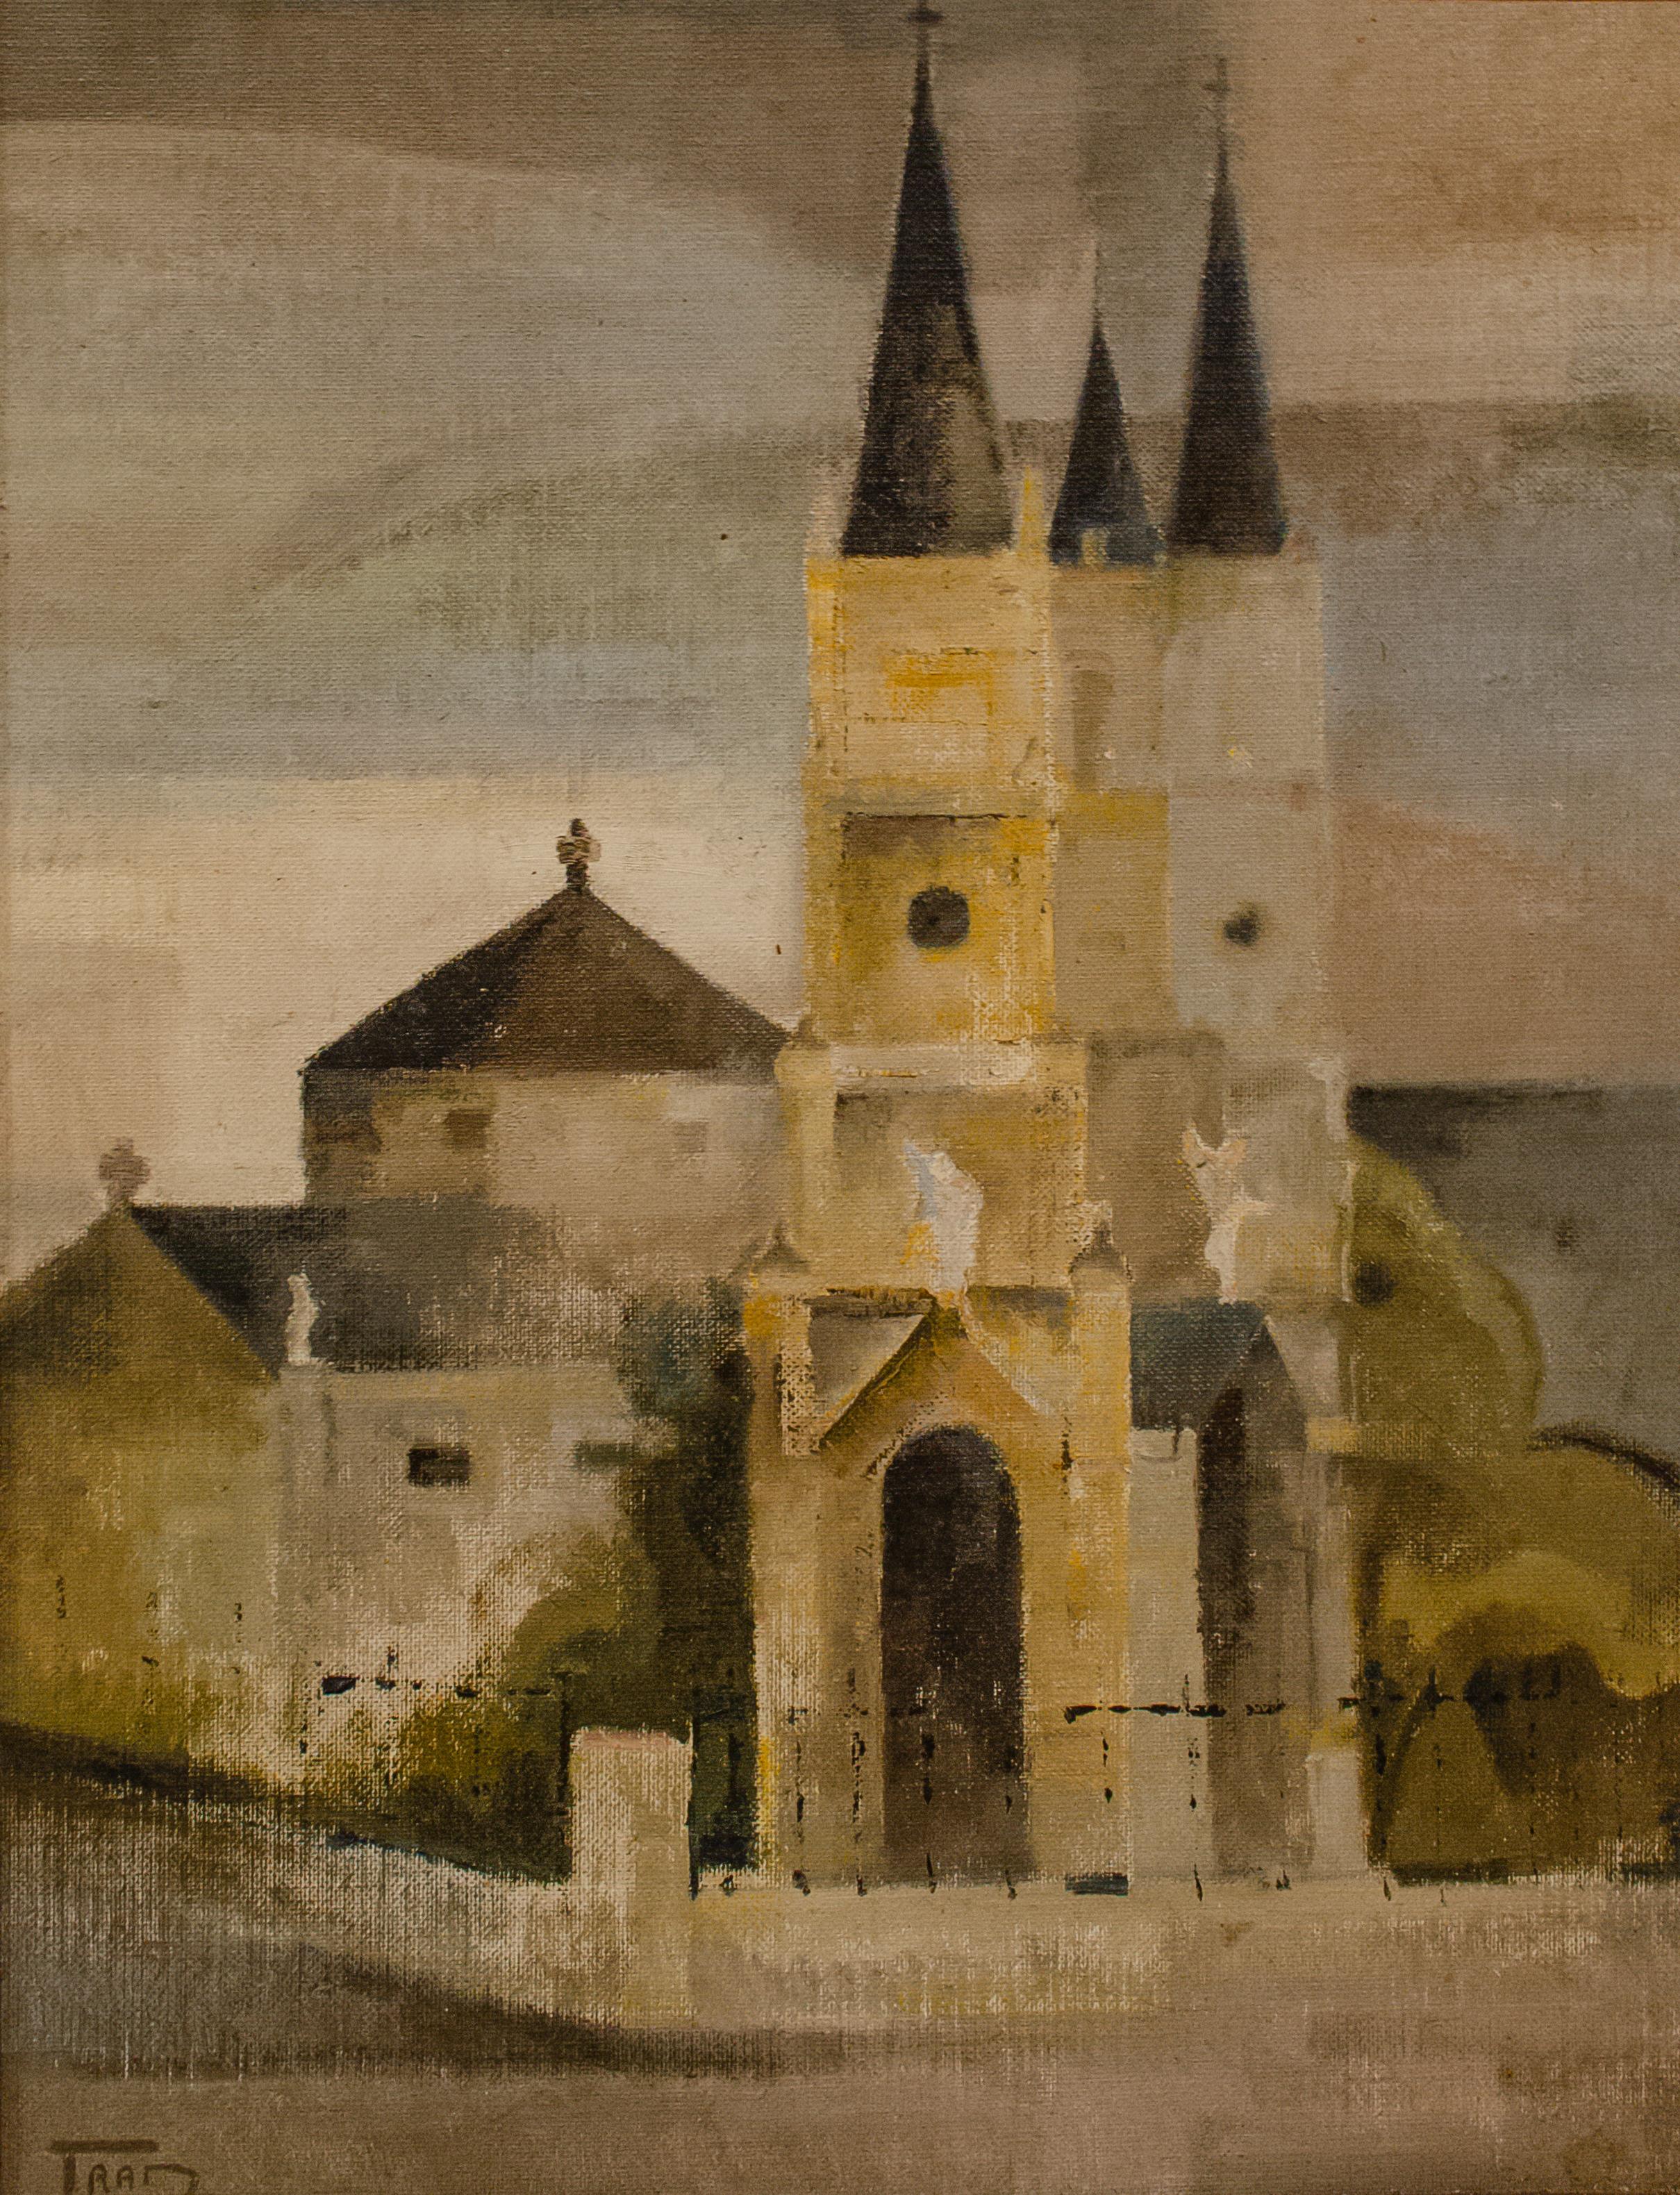 Emilio Trad (Argentinian, b. 1953)
Untitled (Church), 1978
Oil on board
18 1/4 x 14 in.
Framed: 25 3/4 x 22 1/4 in.
Signed lower left: Trad
Signed and dated verso: Emilio Trad / 1978

Emilio Trad was born in 1953, in Buenos Aires. After he graduated